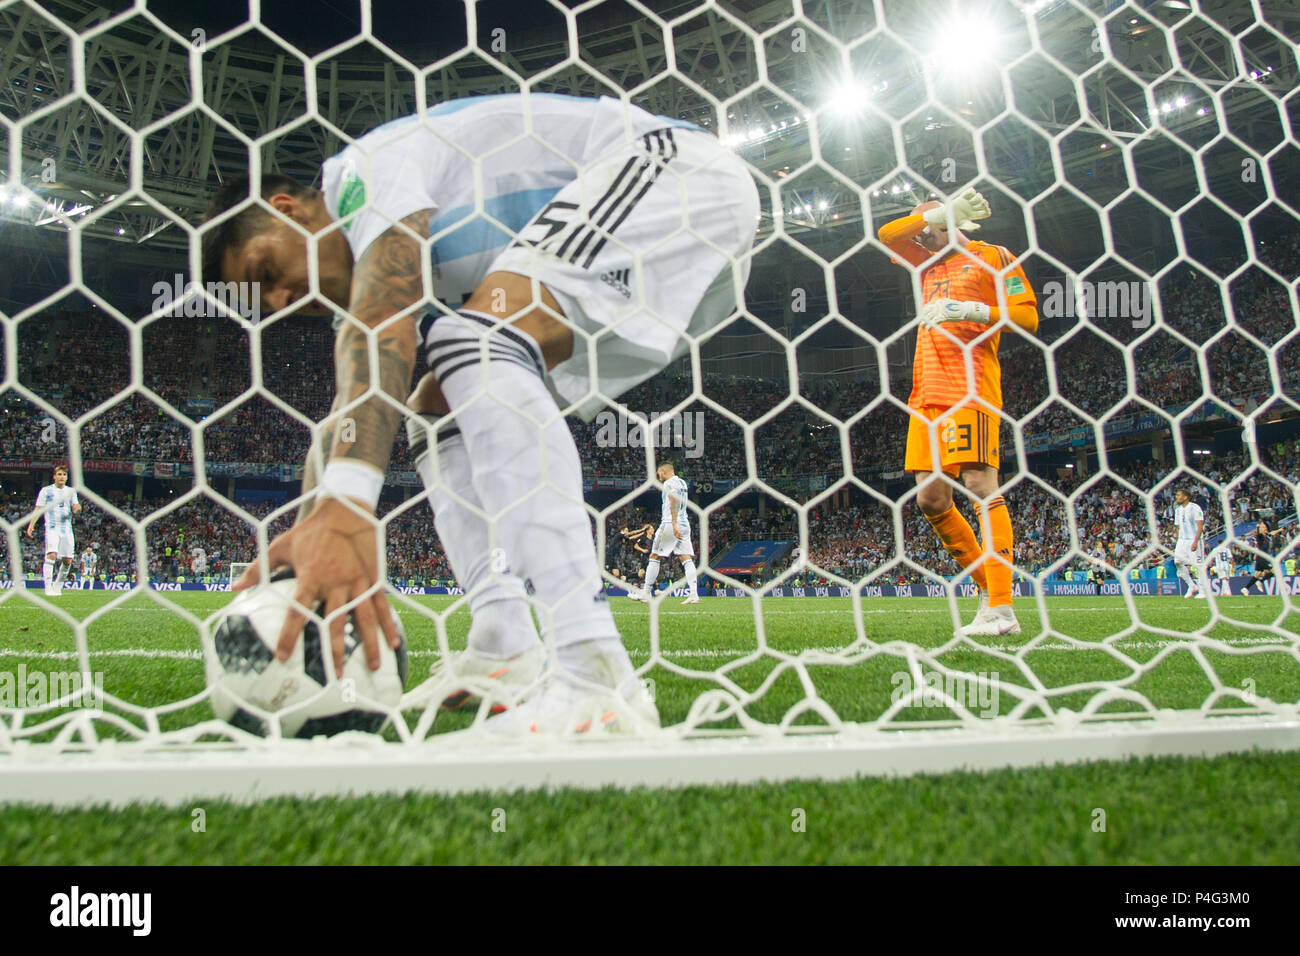 Nizhny Novgorod, Russia. 21 June 2018.  Lucas BIGLIA (ARG) gets the net out of the net and goalkeeper Wilfredo CABALLERO (ARG) is disappointed, disappointed, disappointed, disappointed, sad, frustrated, frustrated, frustrated, full figure, Argentina (ARG ) - Croatia (CRO) 0: 3, Preliminary Round, Group D, Match 23, on 21.06.2018 in Moscow; Football World Cup 2018 in Russia from 14.06. - 15.07.2018. | usage worldwide Credit: dpa/Alamy Live News Credit: dpa picture alliance/Alamy Live News Stock Photo